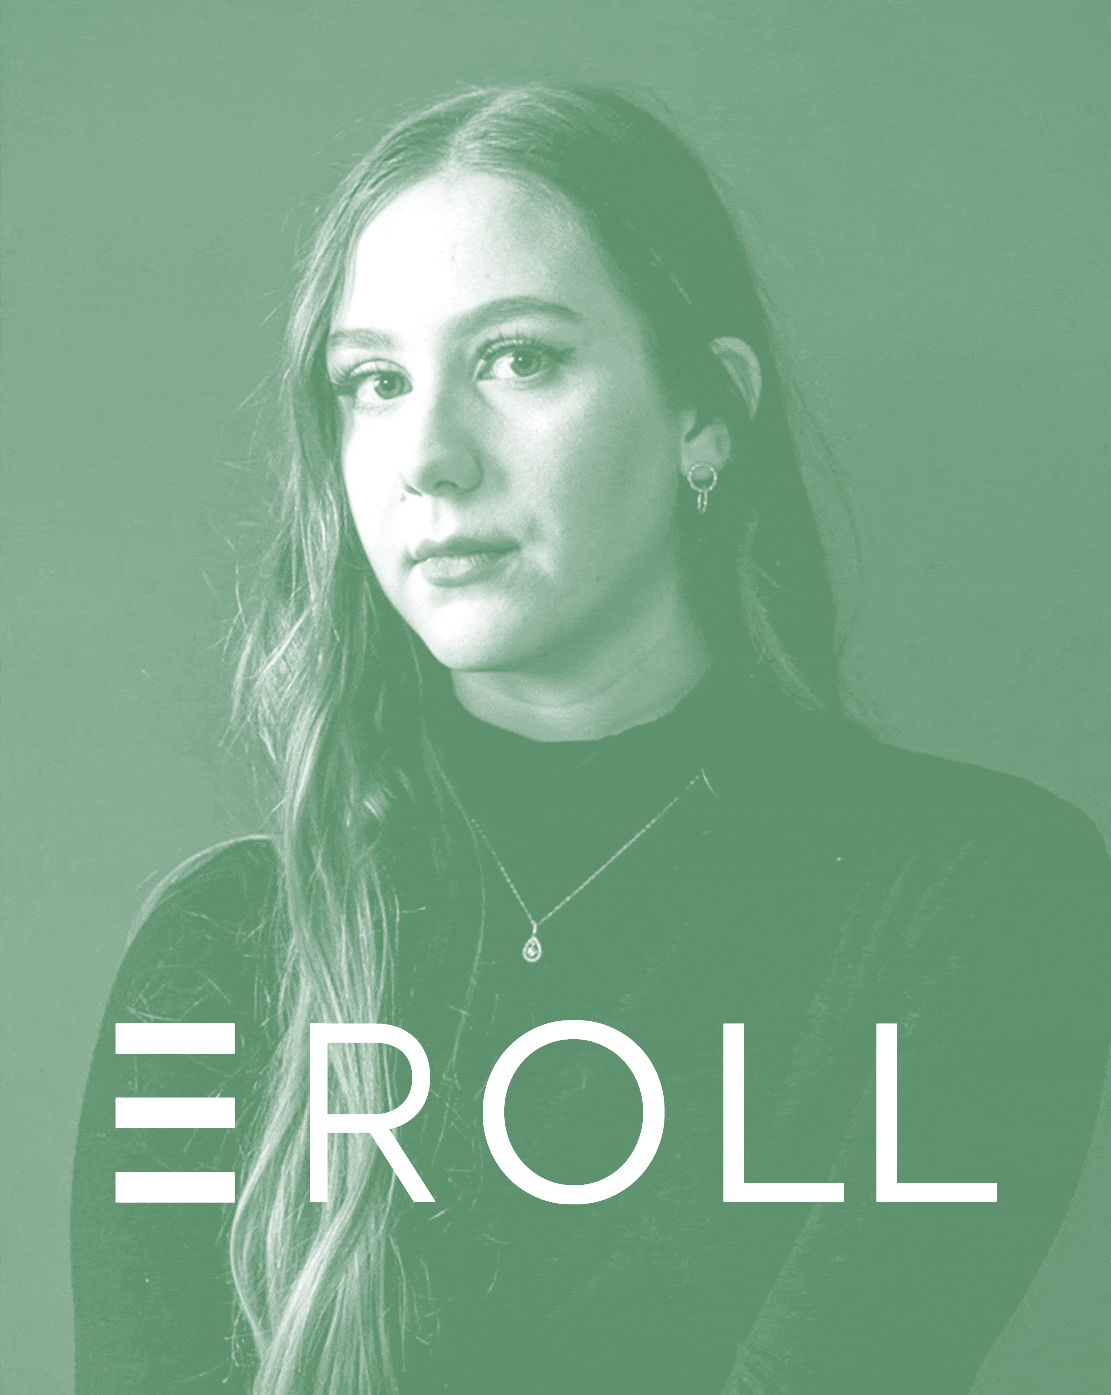 EPIC E-Roll | Miranda Lindner, Project Manager